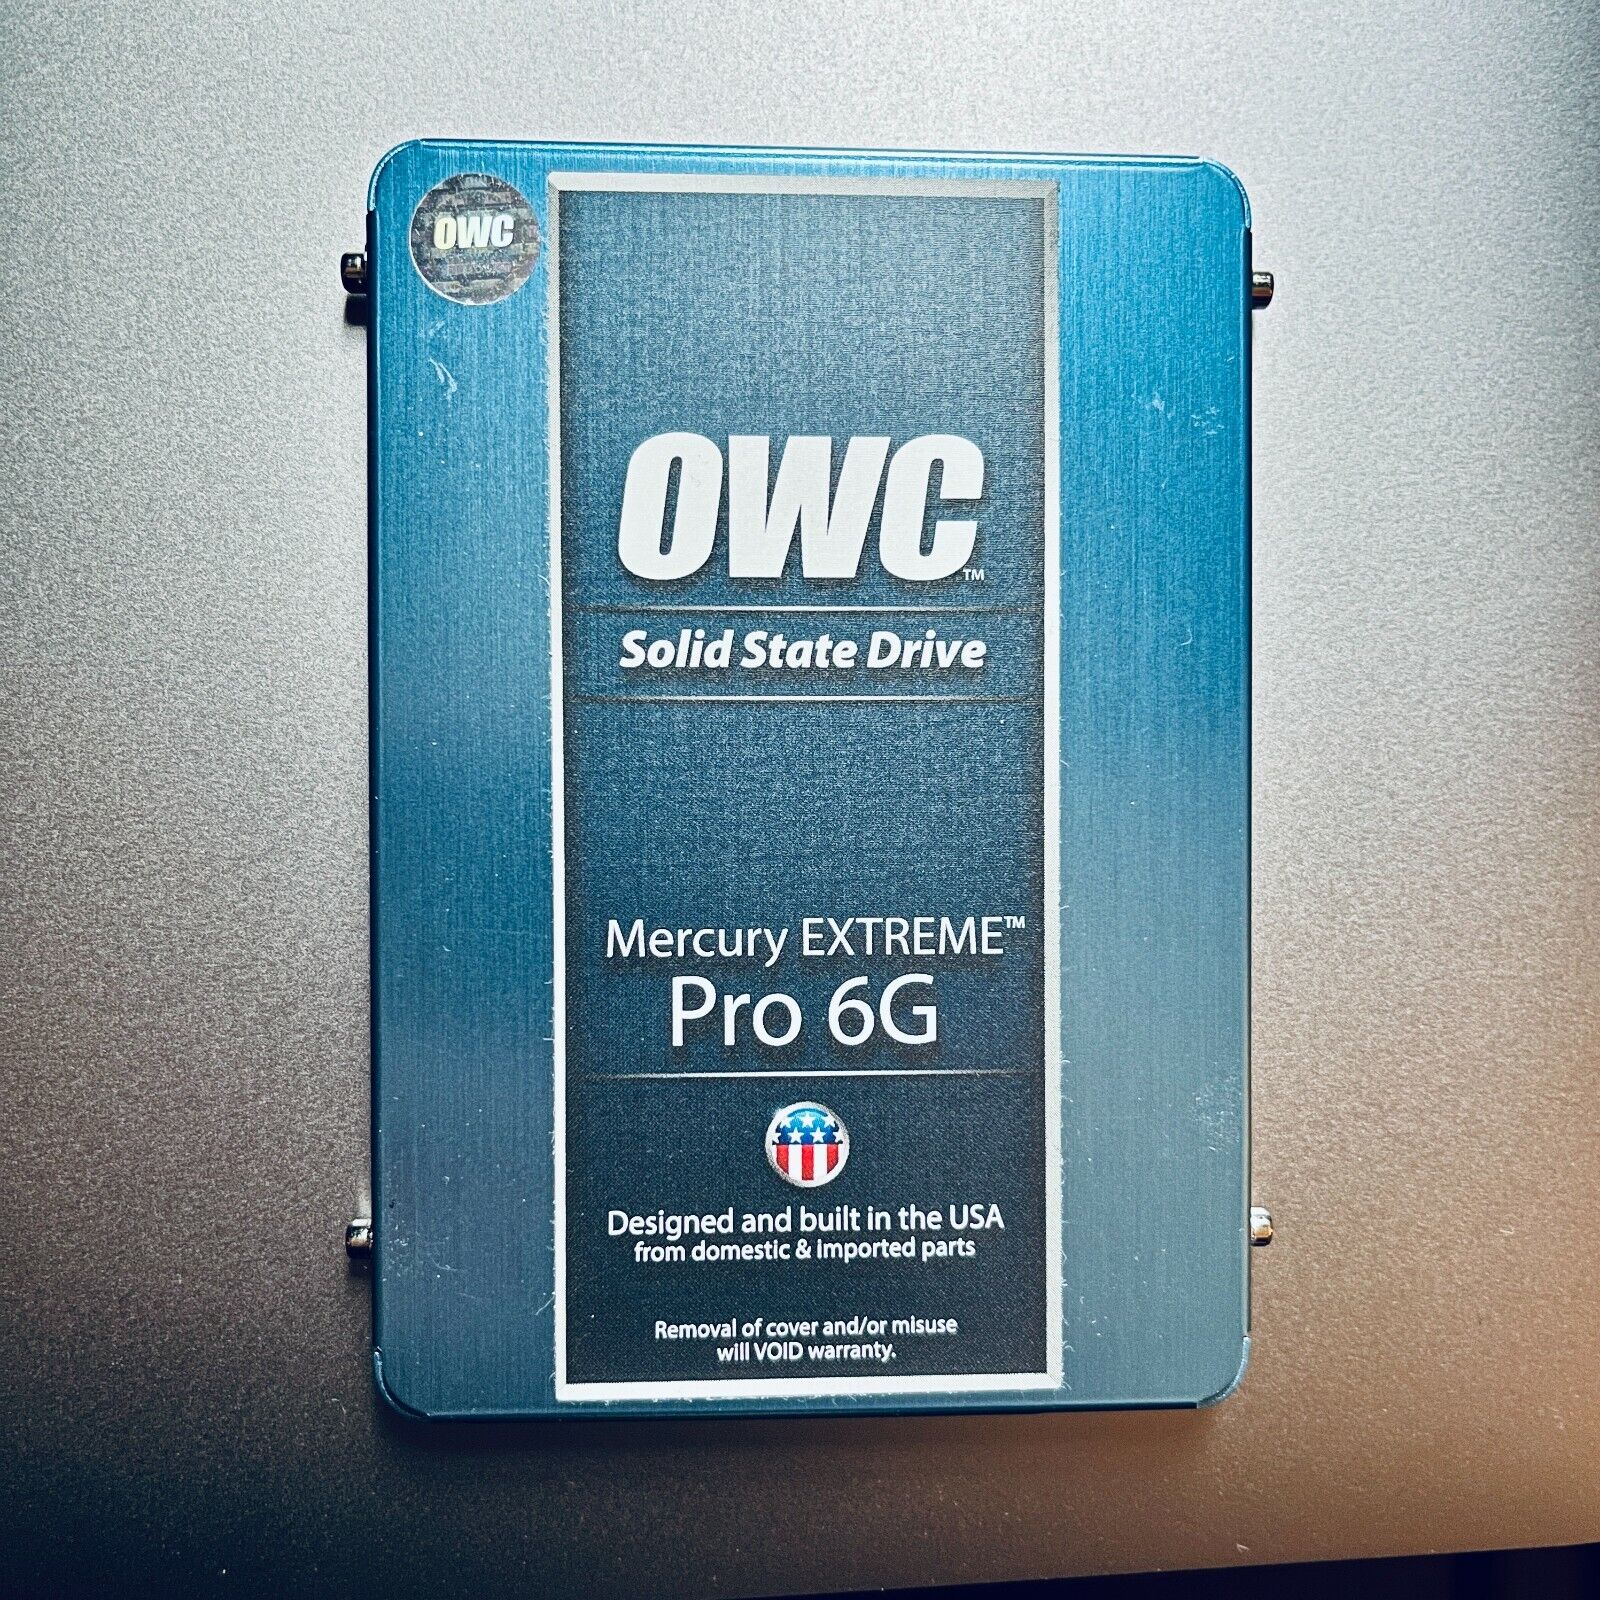 OWC 480GB Mercury Extreme Pro 6G 2.5-inch 7mm SATA 6.0Gb/s Solid-State Drive SSD